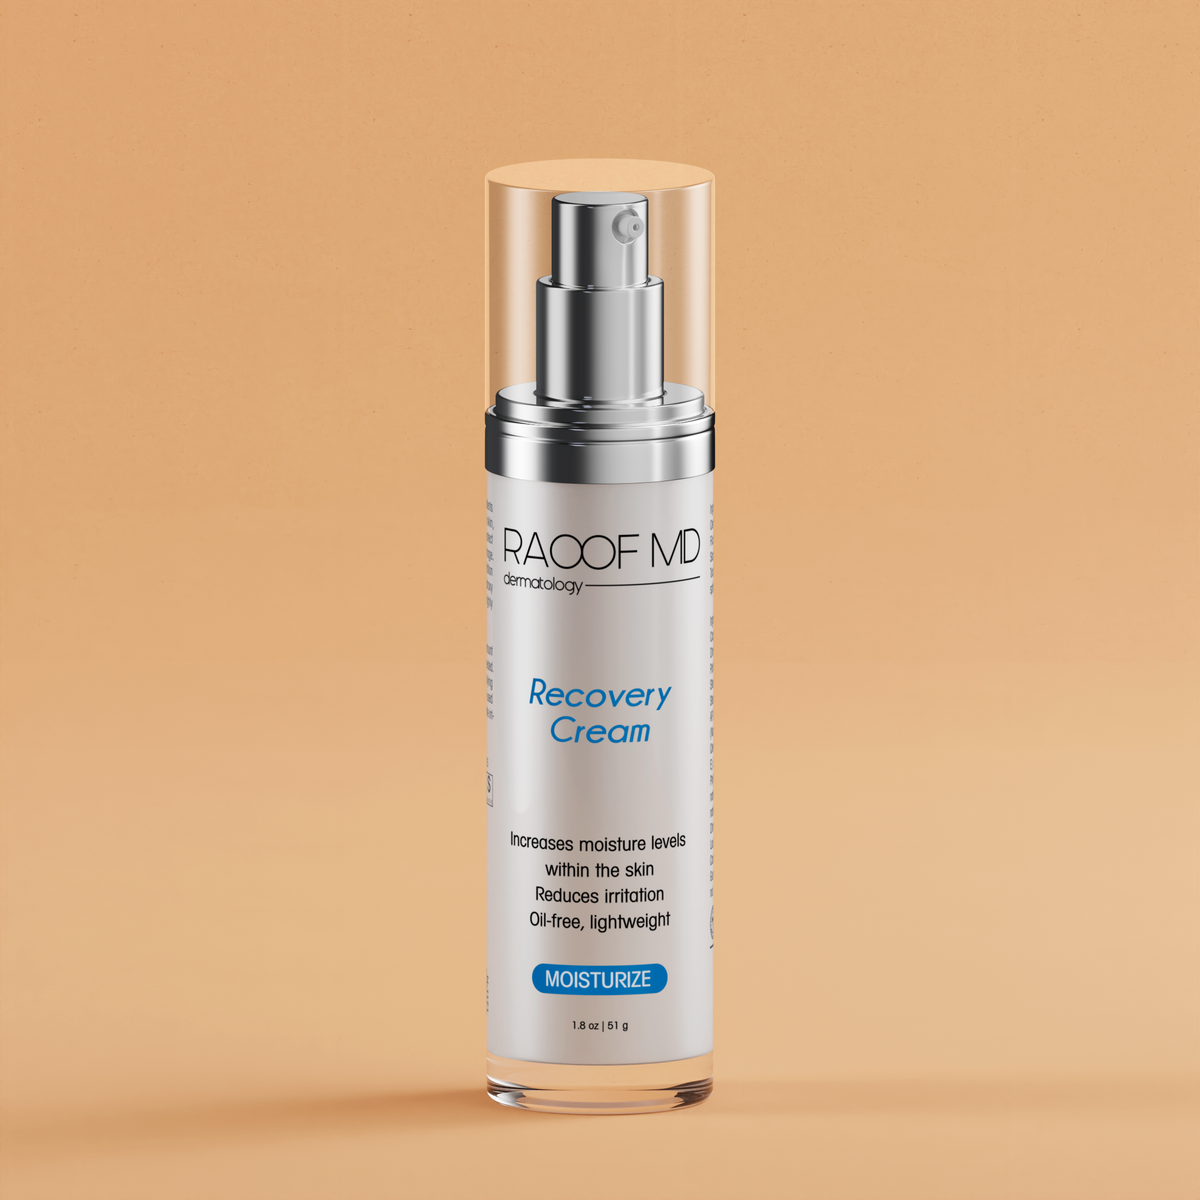 Recovery Cream by RAOOF MD dermatology